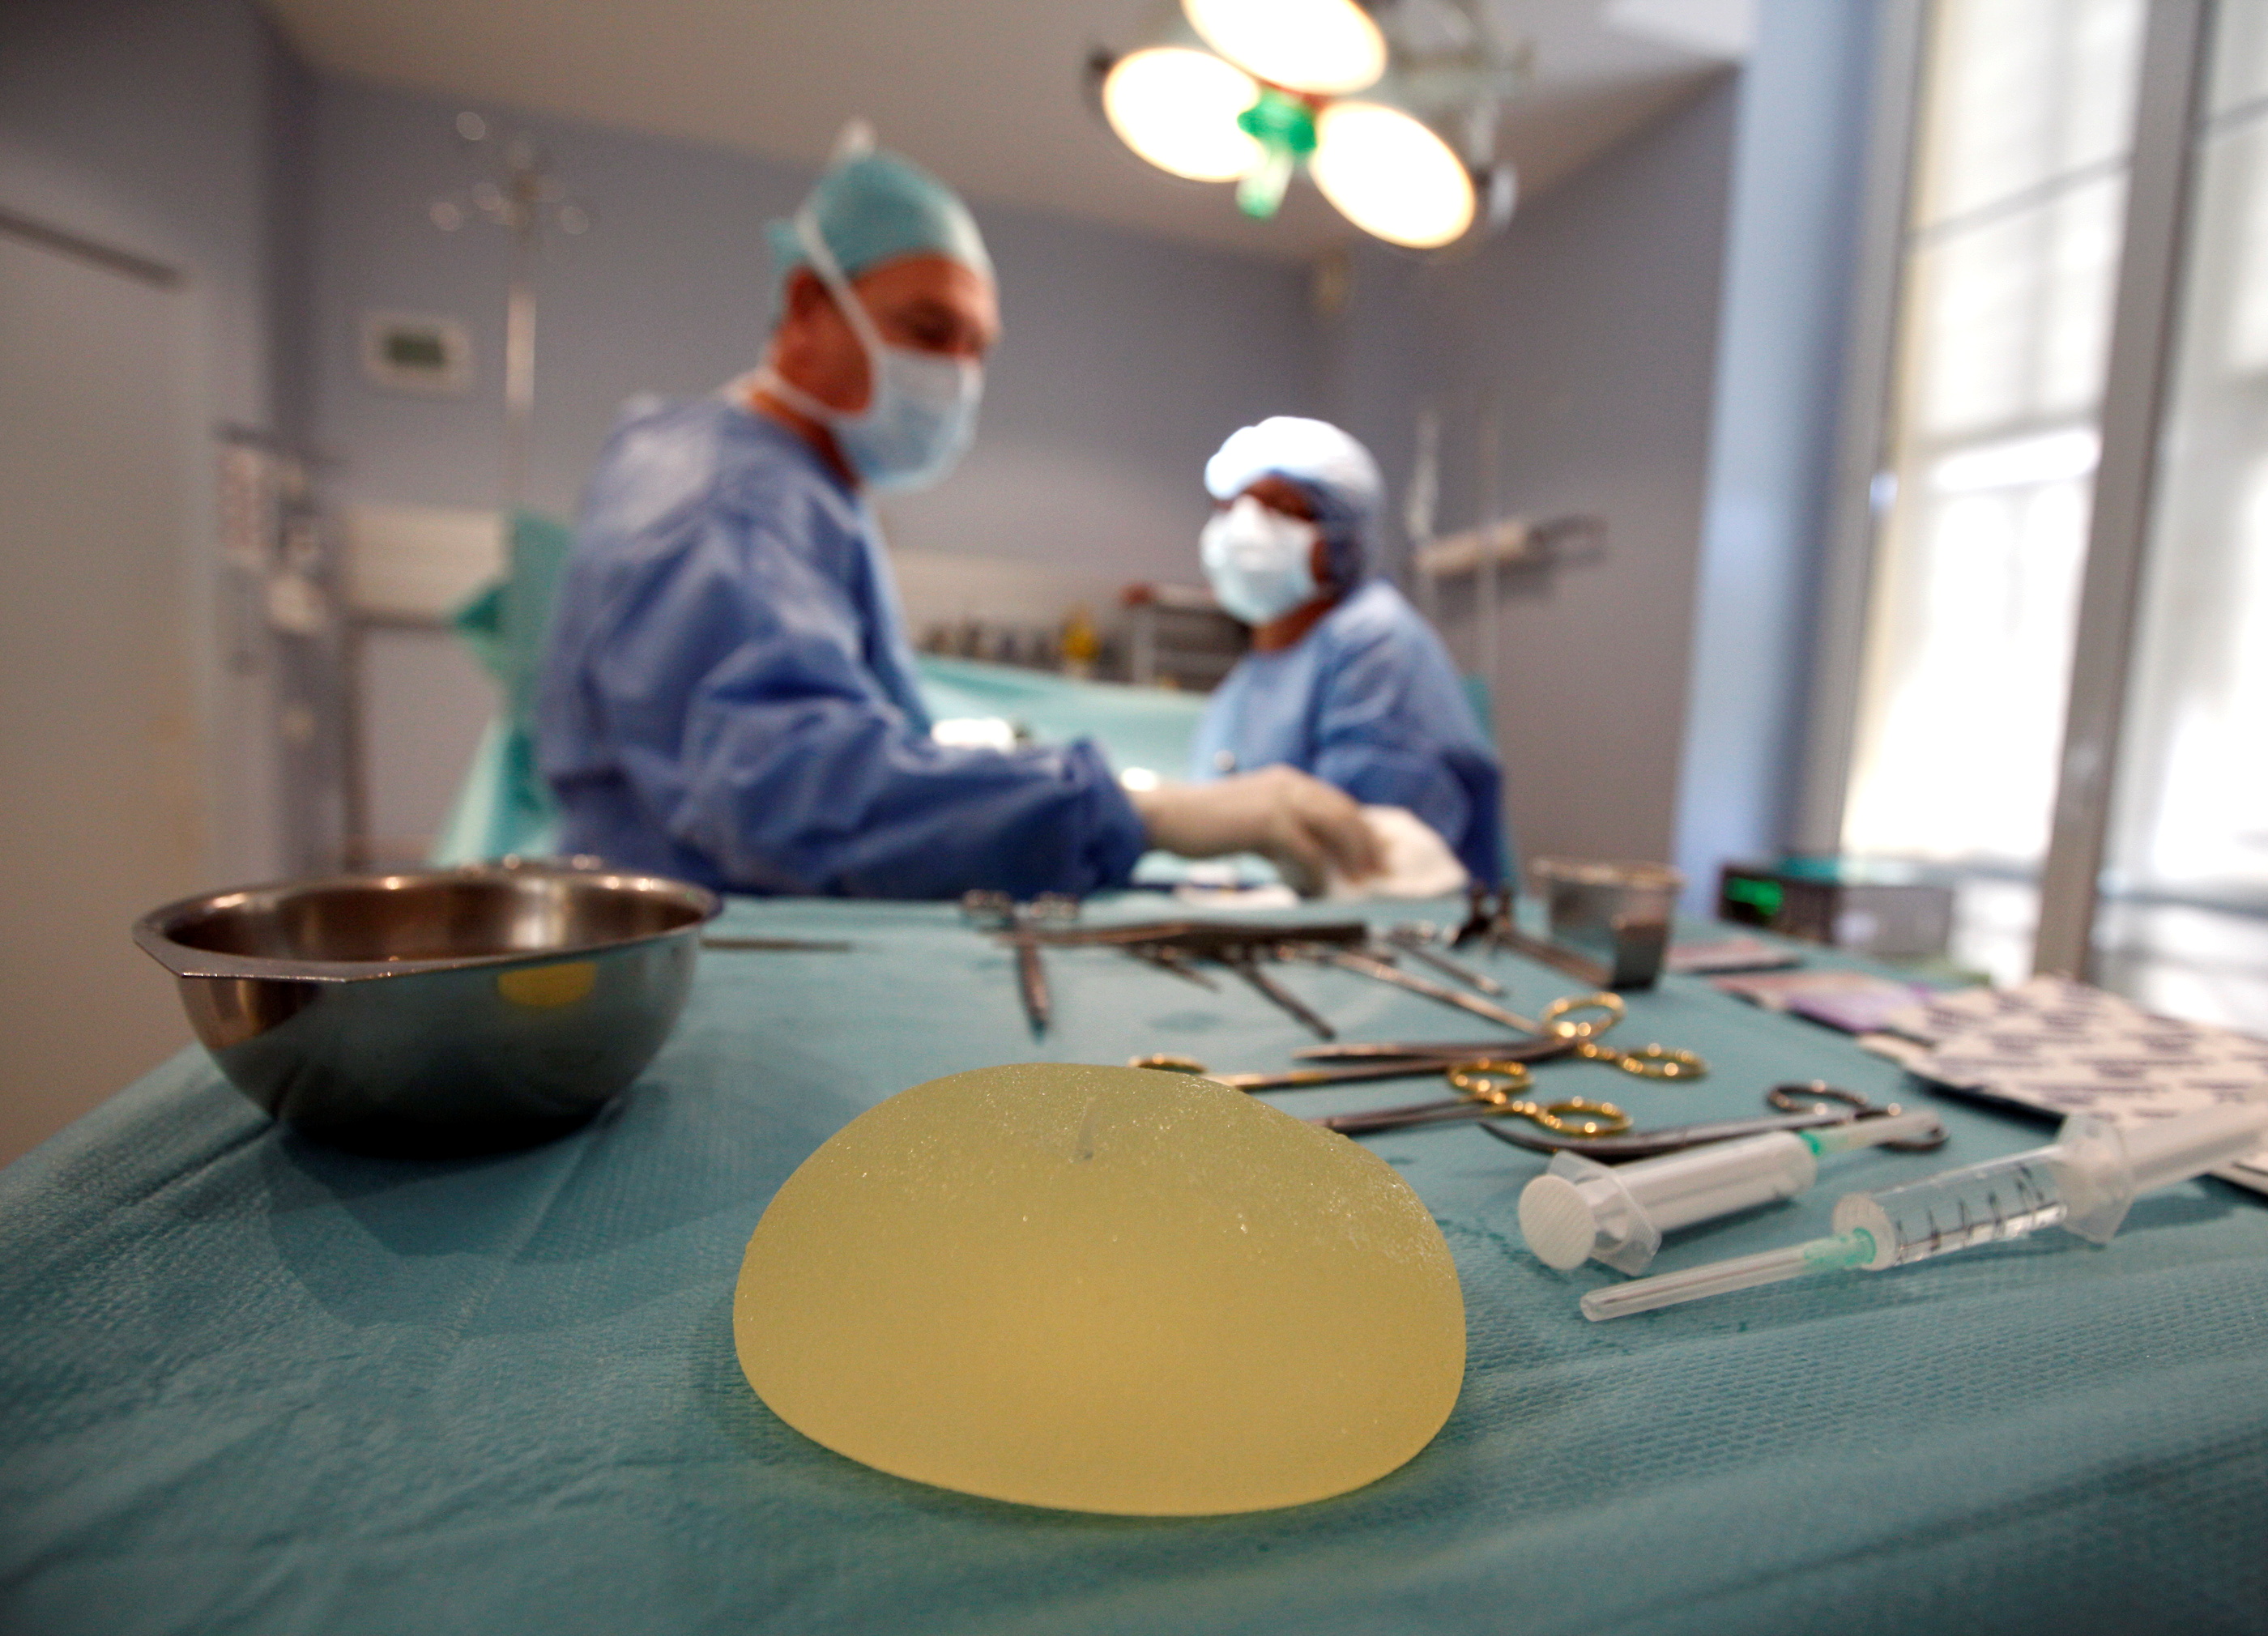 A defective silicone gel breast implant manufactured by French company Poly Implant Prothese (PIP) is seen near surgical instruments after being removed from a patient by plastic surgeon Denis Boucq (L) in a clinic in Nice December 21, 2011.  REUTERS/Eric Gaillard